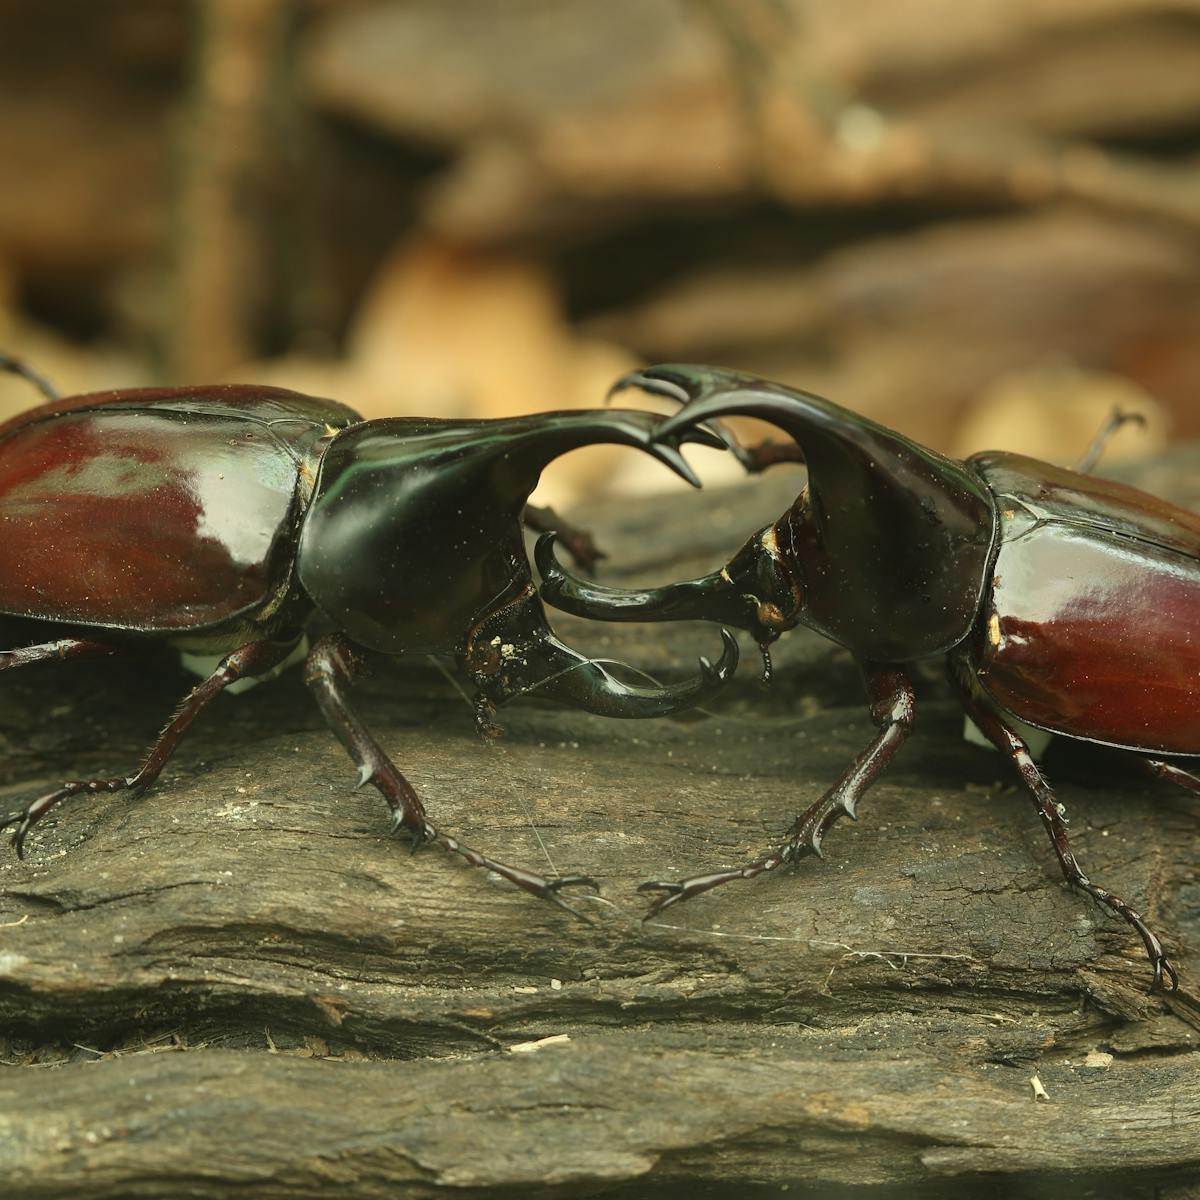 Belligerent beetles show that fighting for mates could help animals survive  habitat loss